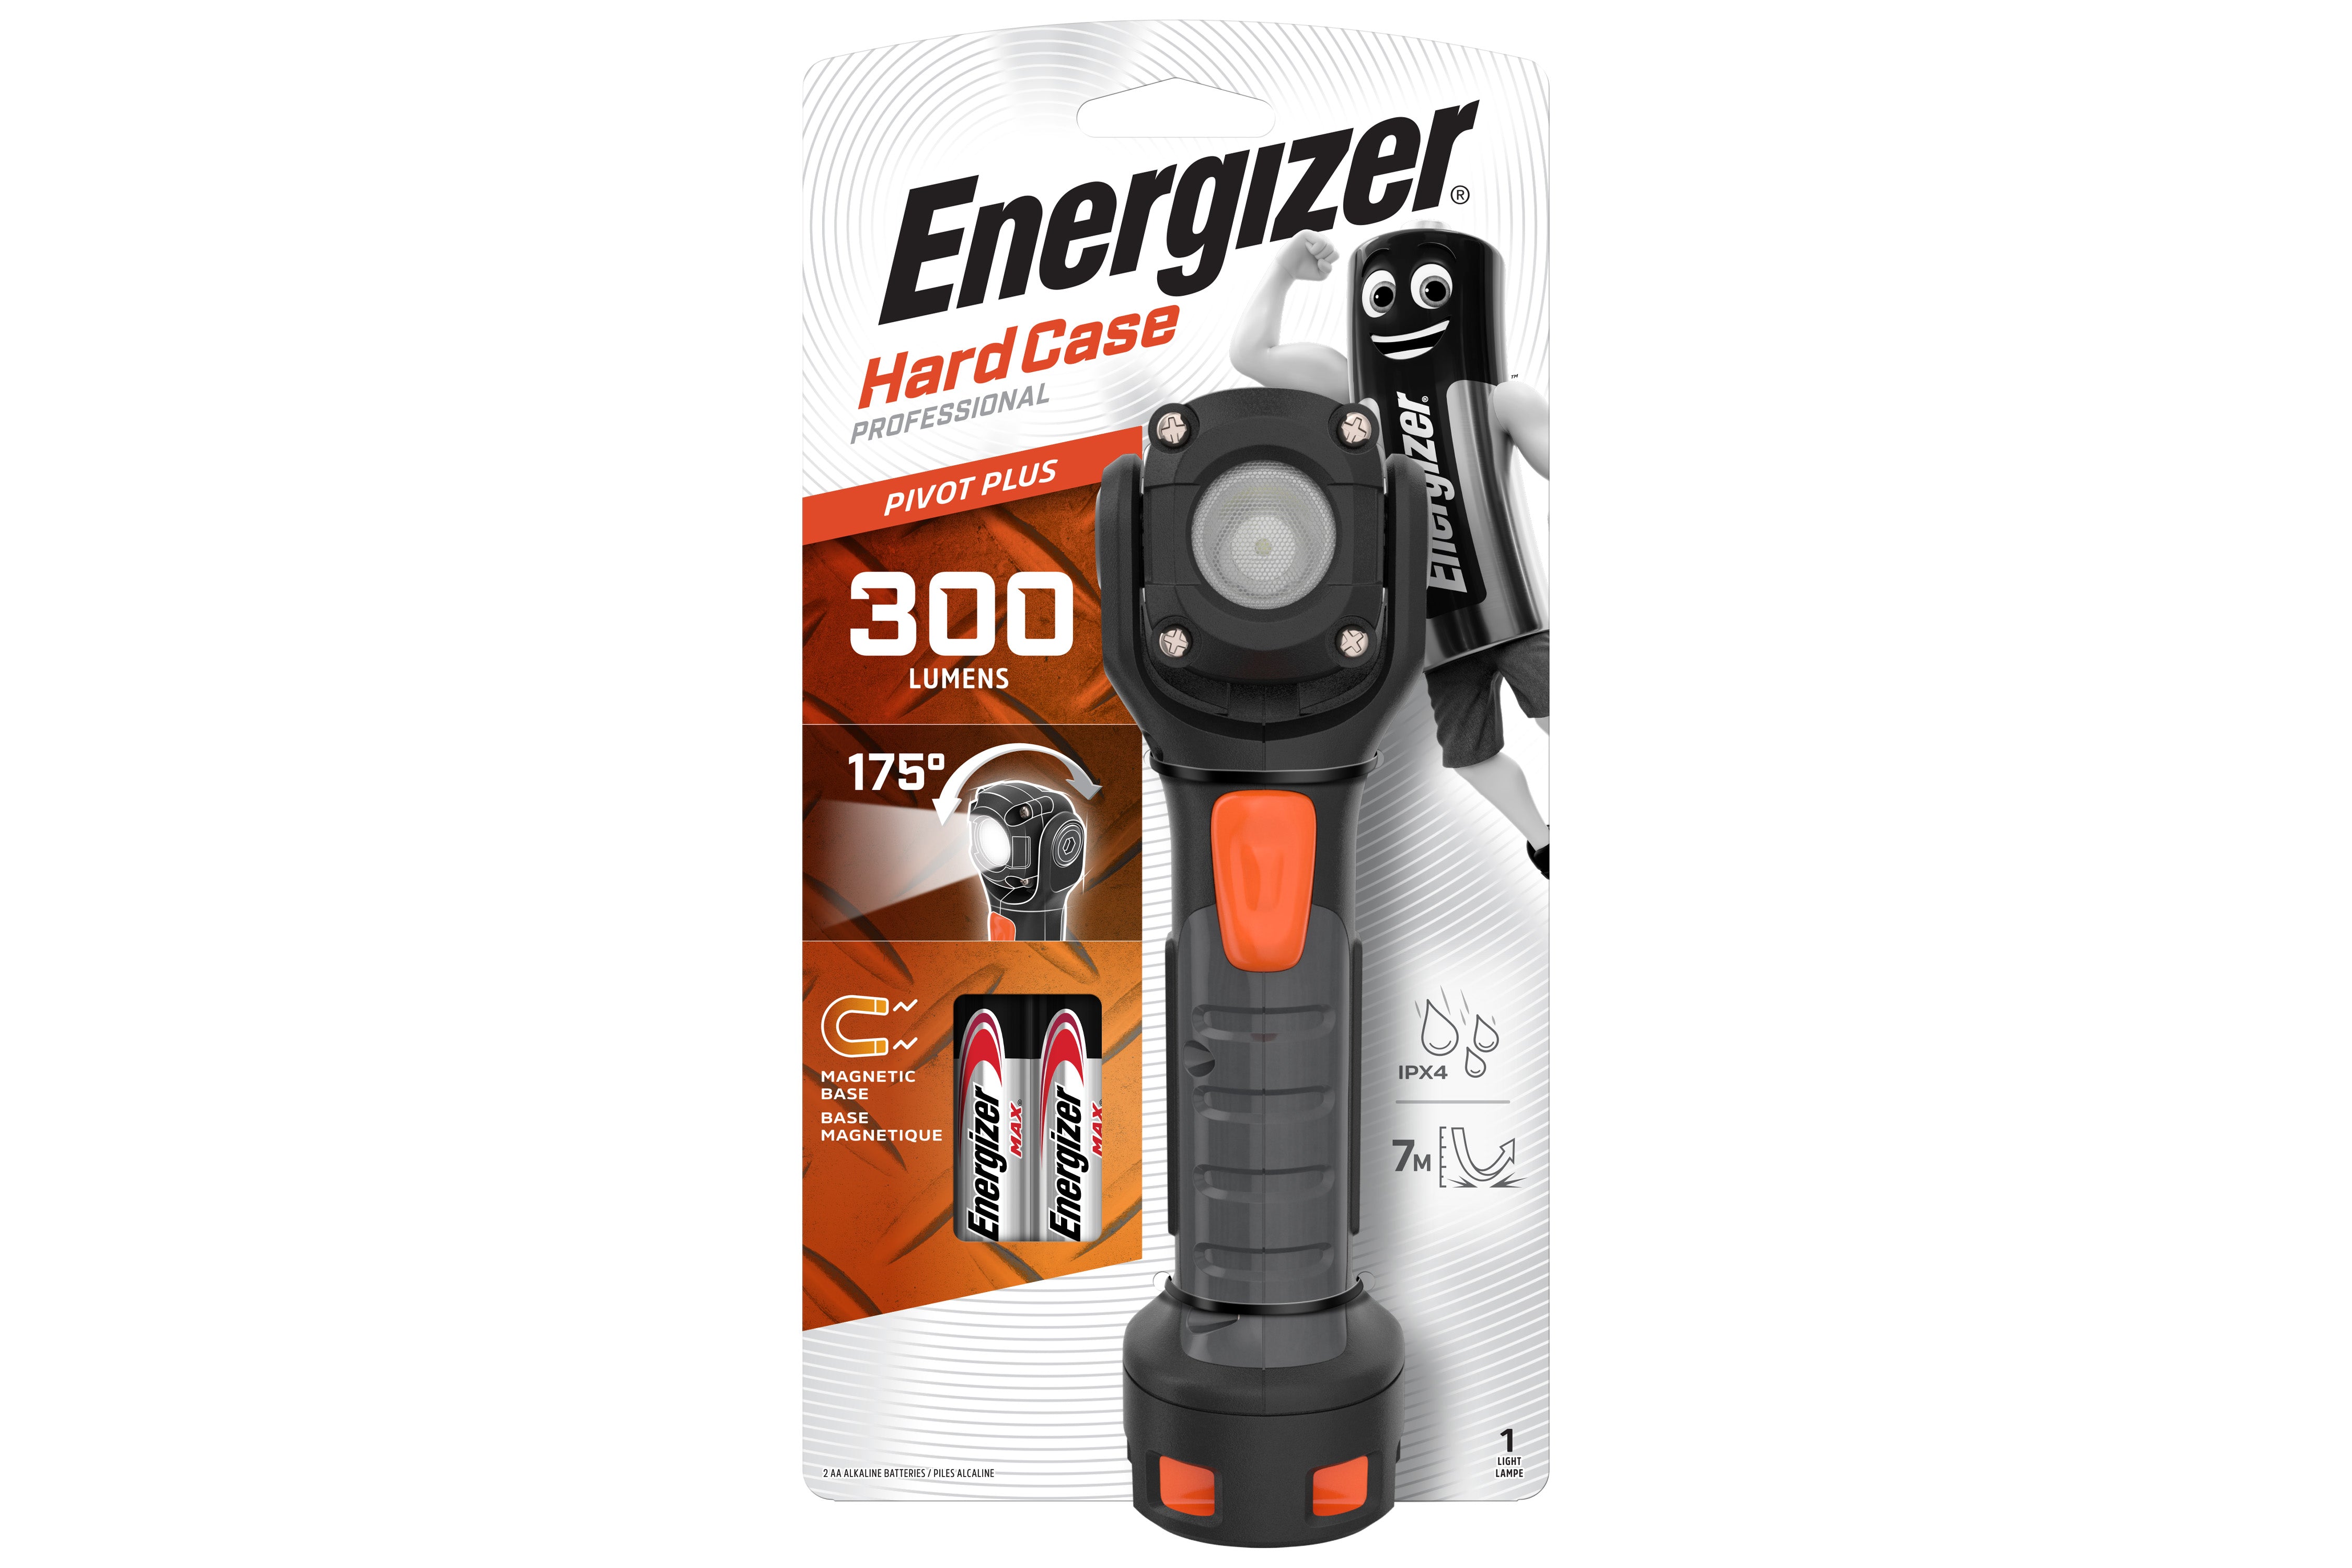 Energizer Hard Case 300 Lumens Pivot Rotating Head LED Torch with Magnetic Base & 2x AA Batteries